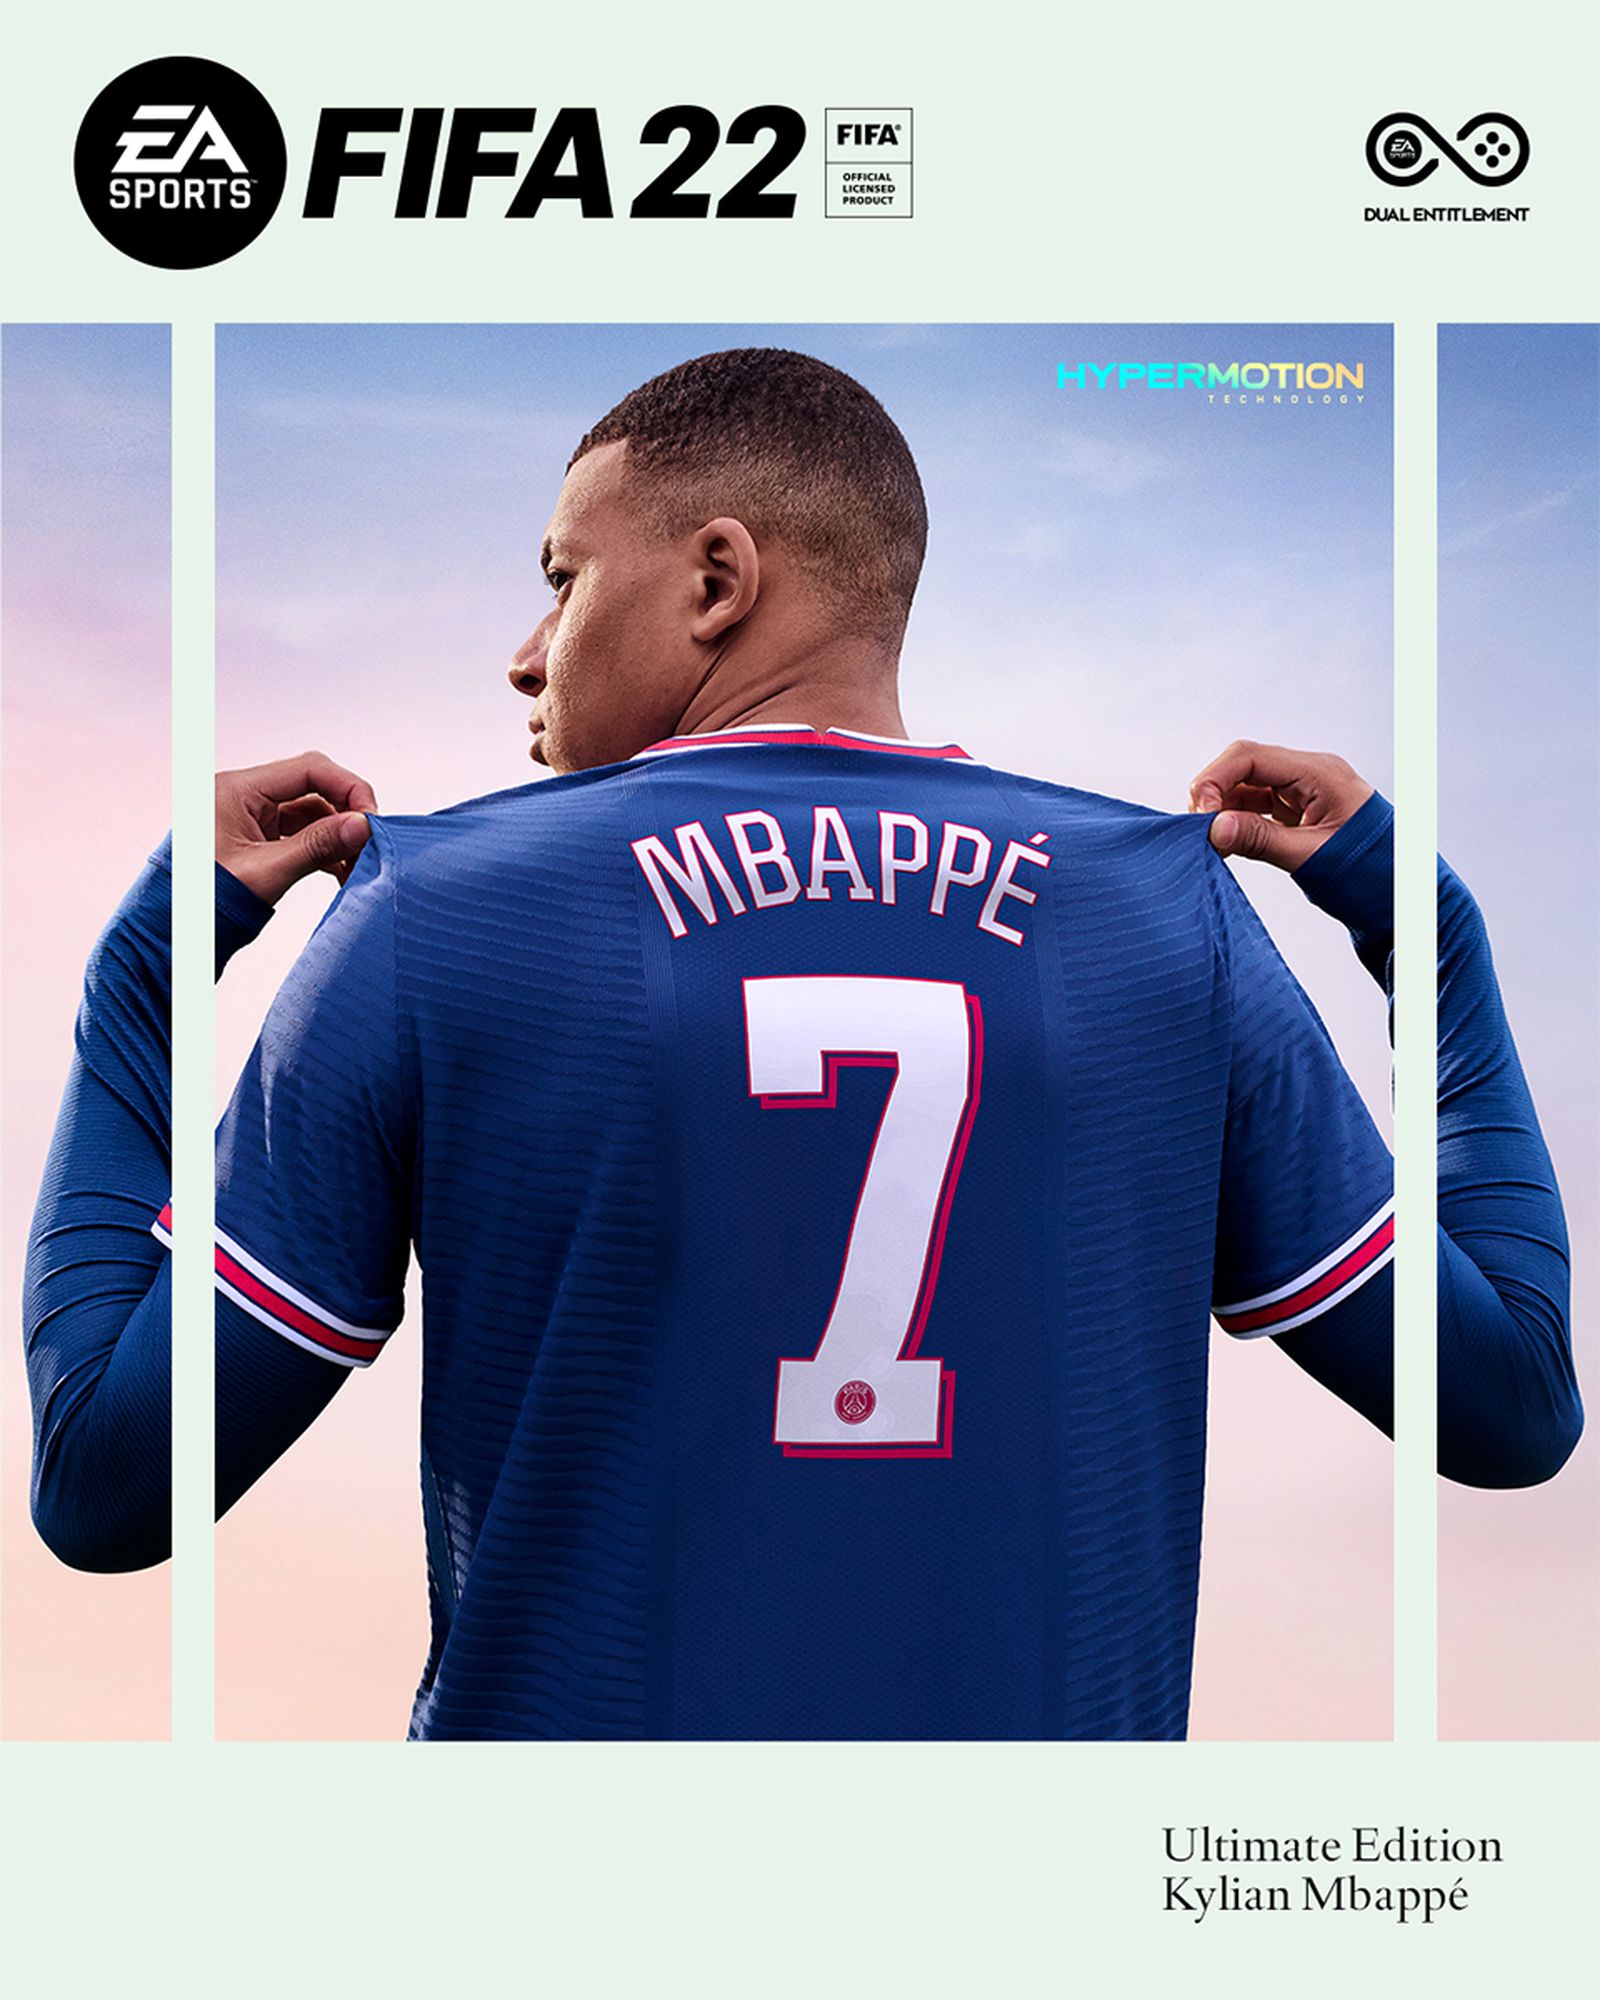 kylian-mbappe-fifa-22-cover-athlete-03